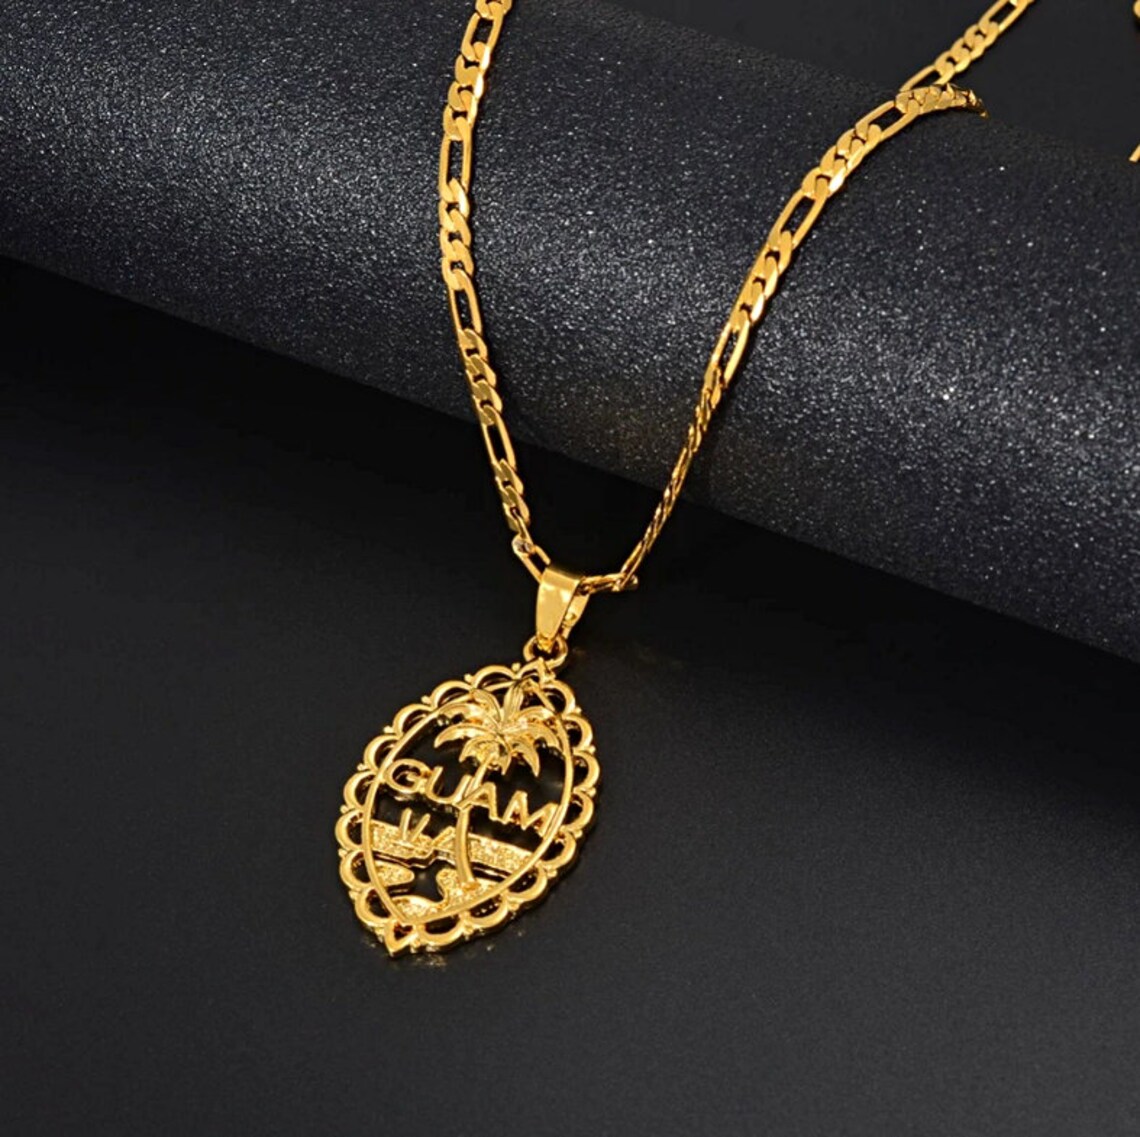 18K Gold-plated Guam Pendant Necklace / Charmed Jewelry Gift / - Etsy UK